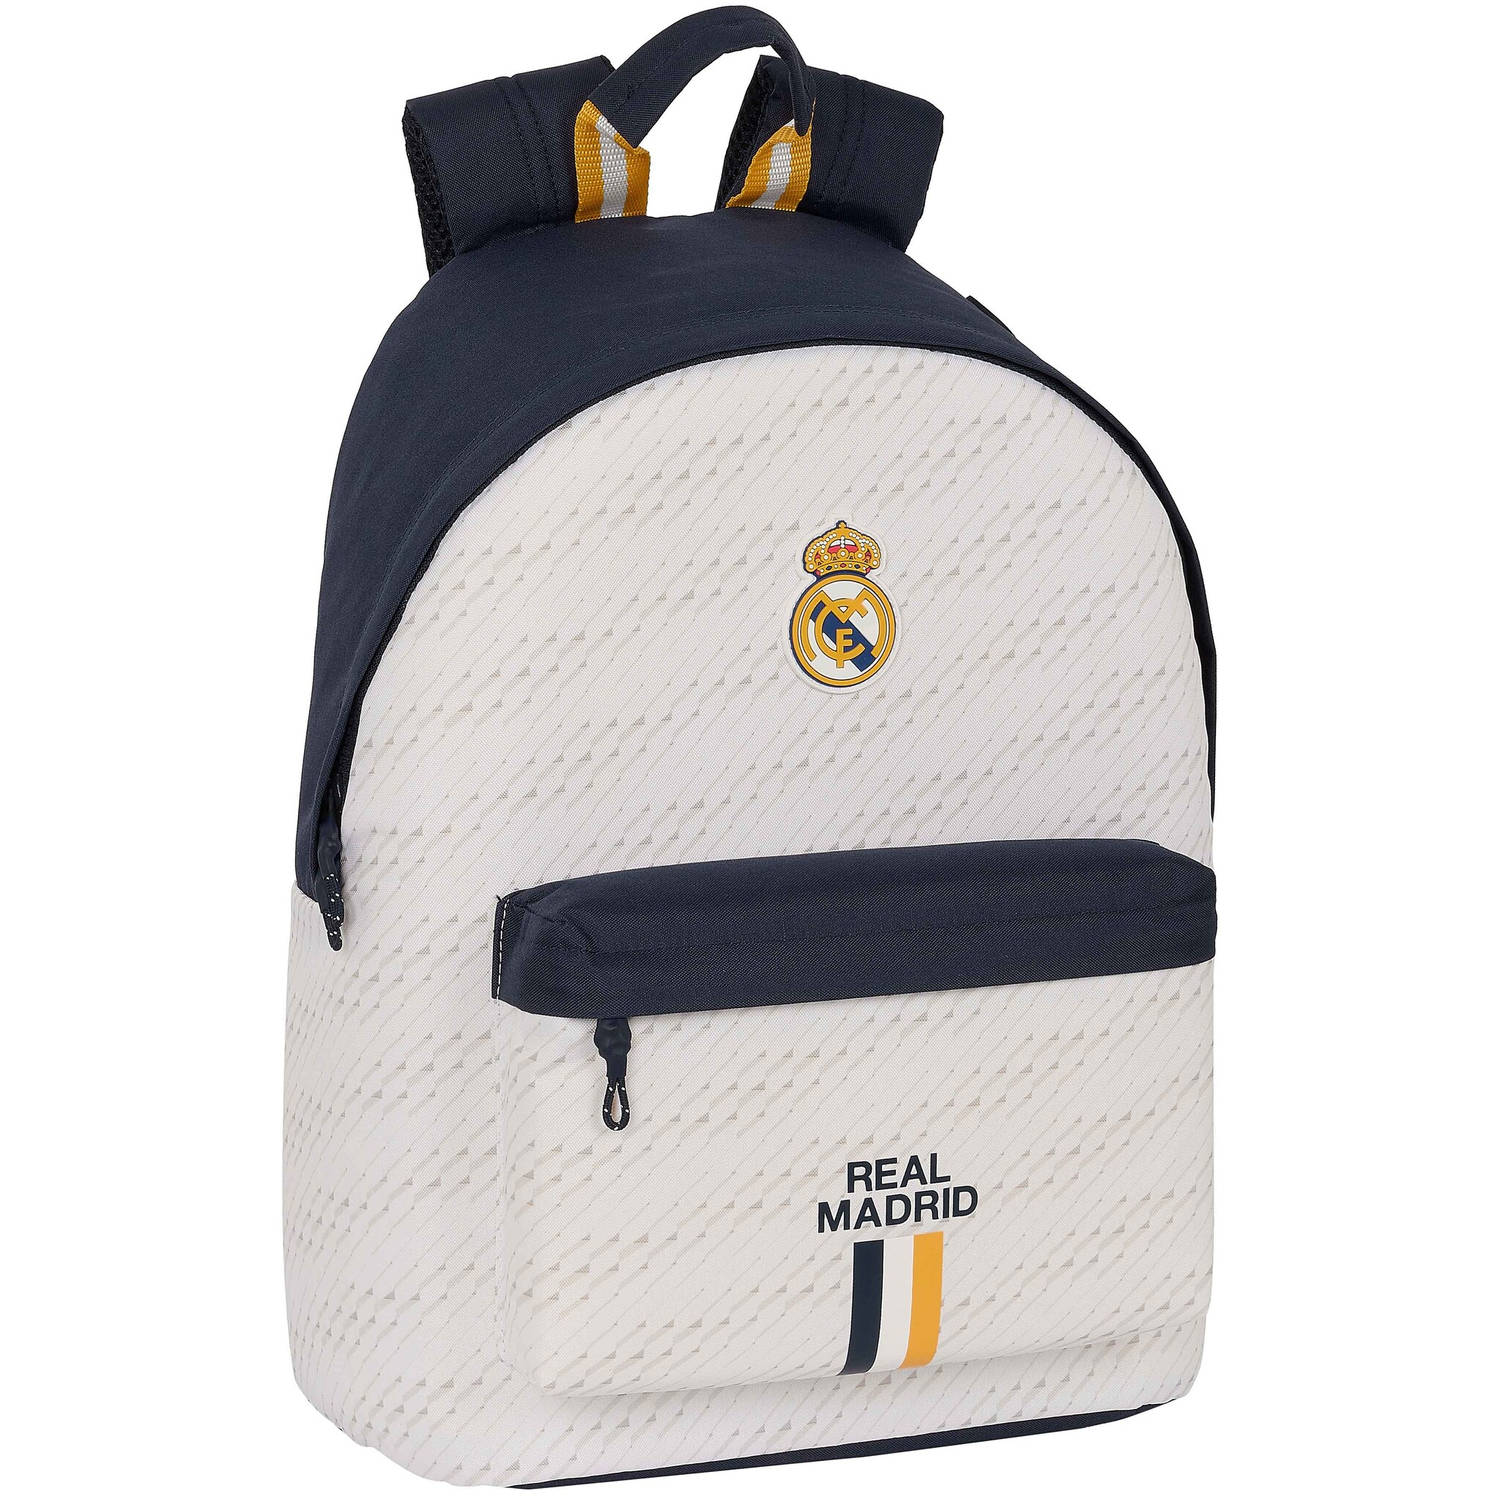 Real Madrid laptop rugzak 41 cm - maat One size - maat One size